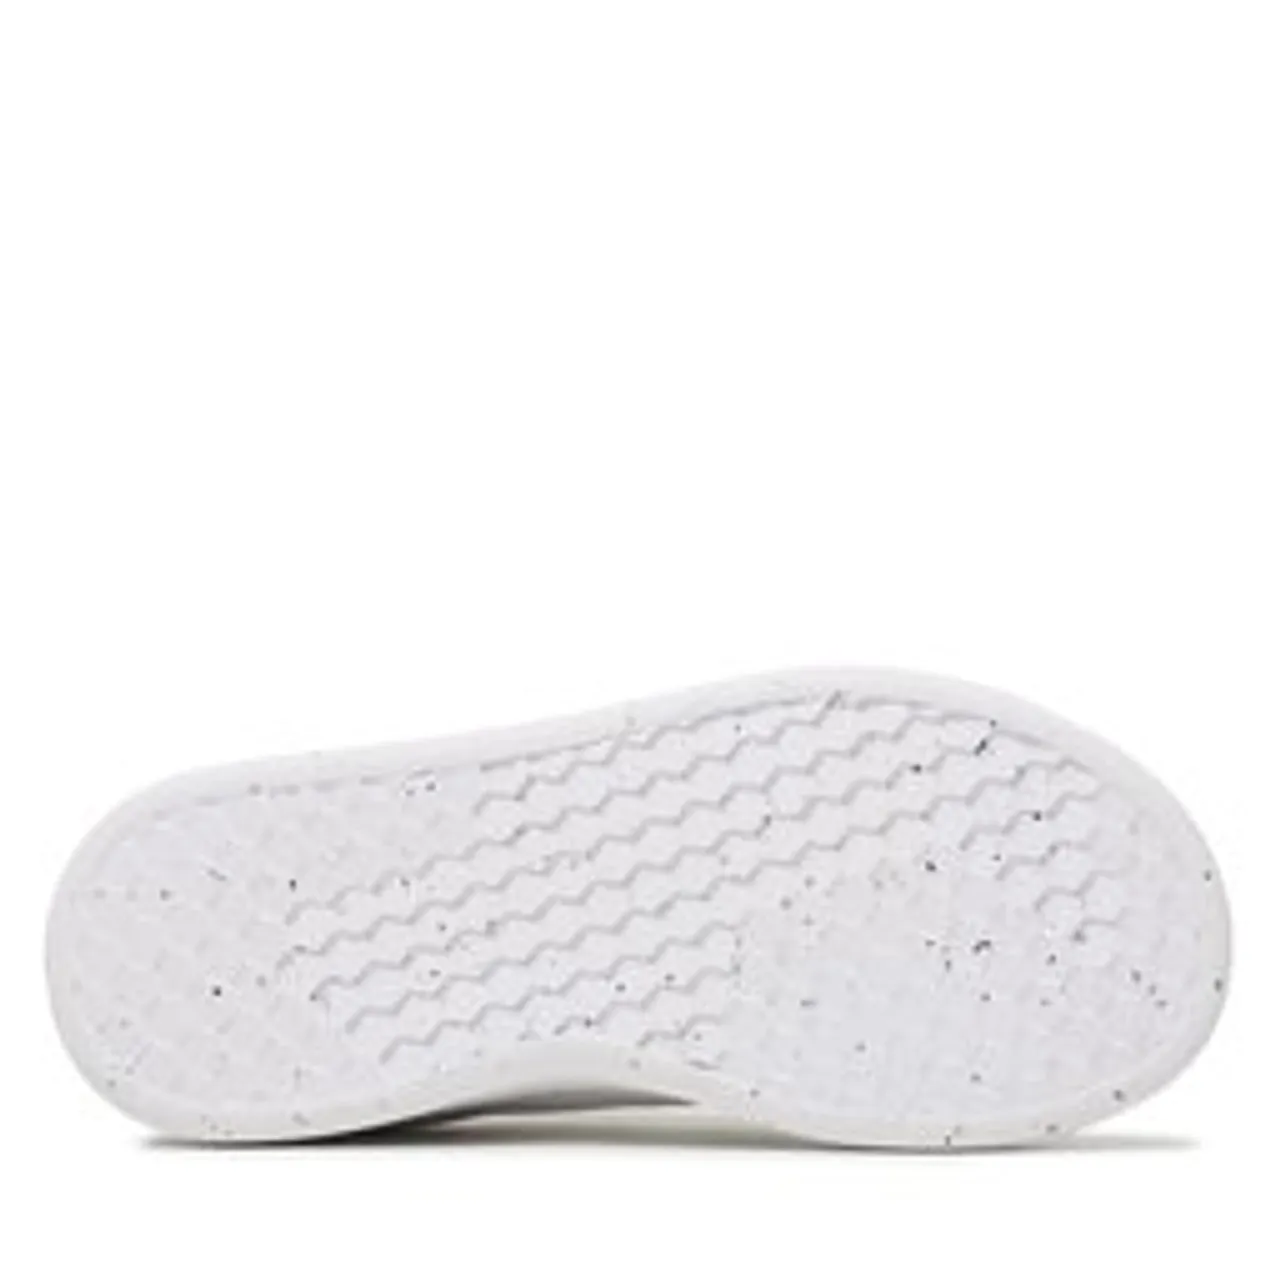 Sneakers adidas Advantage Lifestyle Court H06212 Weiß